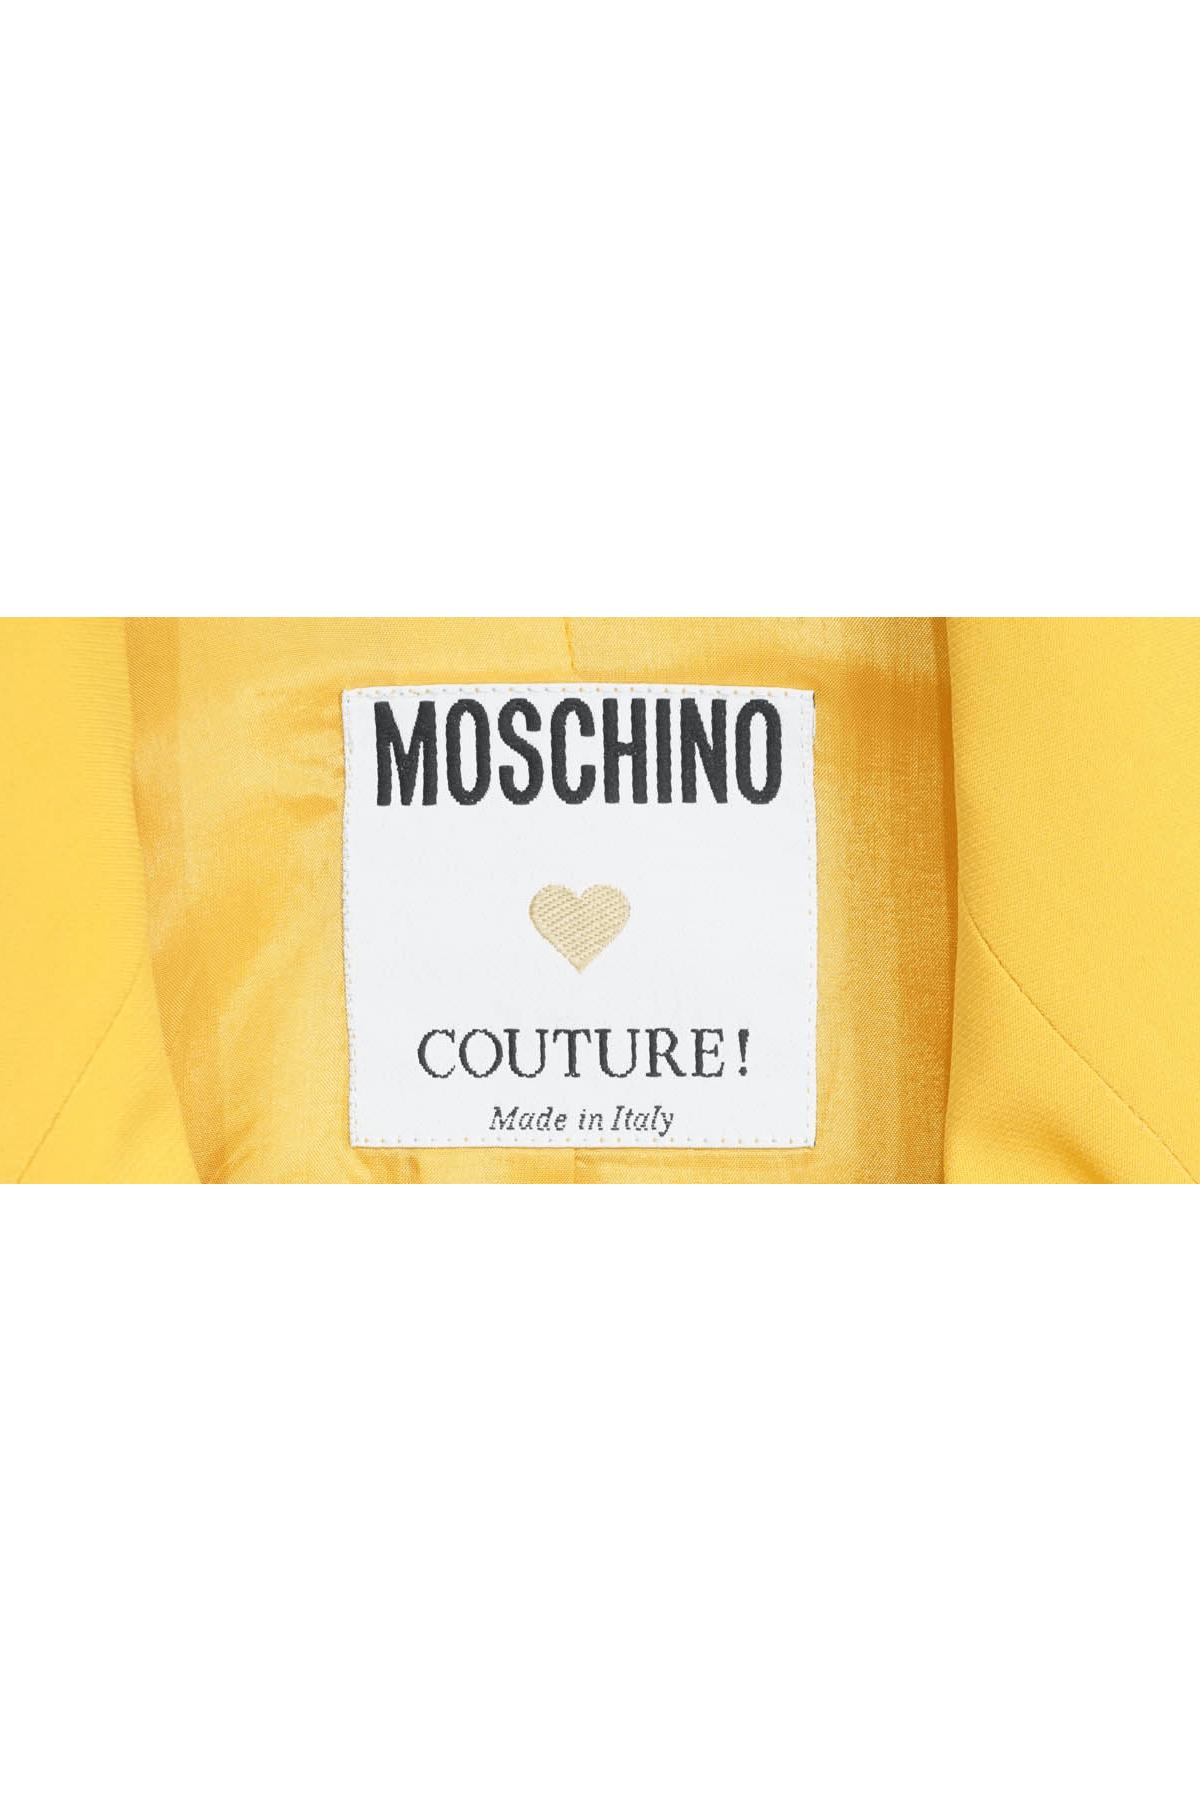 Moschino Couture "Let's Keep Fashion Tidy" Size 8 - Foxy Couture Carmel